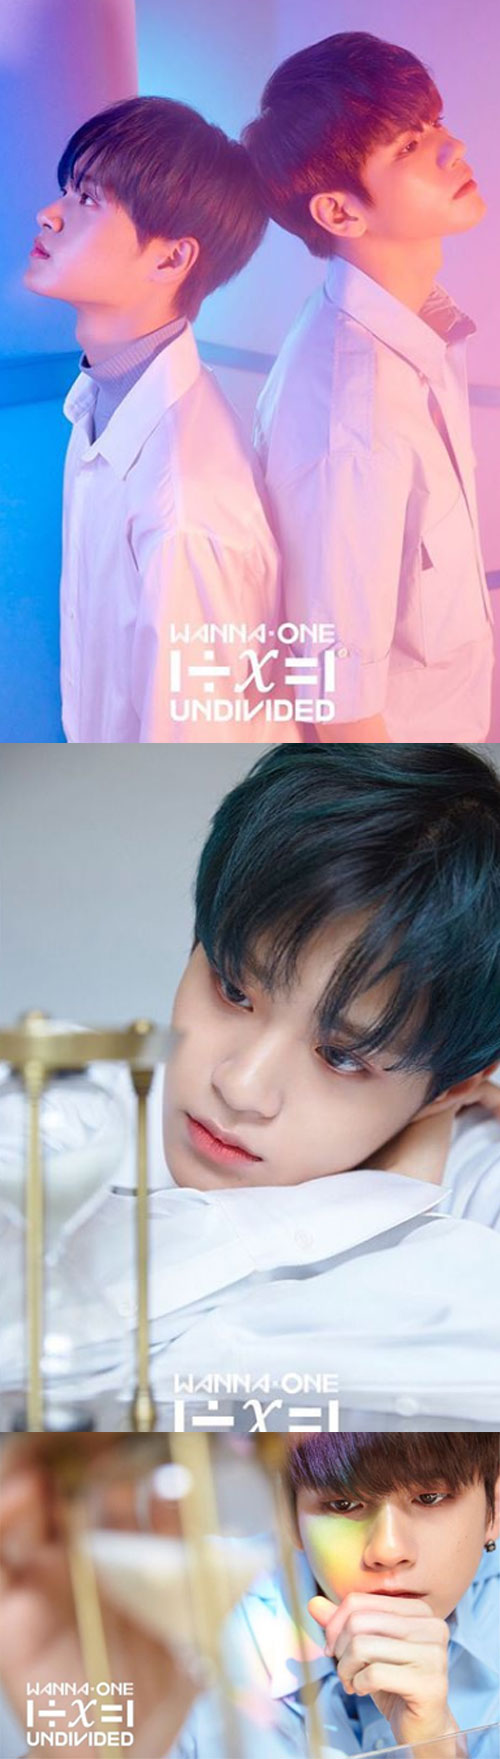 Wanna One Ong Seong-wu and Lee Dae-hwi unit concept photos have been released.On the afternoon of the 16th, Wanna One official SNS said, Wanna One l 1x=1 (UNDIVIDED) Unit Concept Photo # The Hill Wanna One 1x=1 (UNDIVIDED) 06.04 Album Release #WannaOne #WannaOne #UNDIVIDEDED #TheHeal #O Ong Seong-wu and Lee Dae-hwi concept photos were posted along with the article Ong Seong-wu # OngSeongWu # Lee Dae-hwi # Lee Dae-hwi # Heize # Heize.First of all, Ong Seong-wu in the concept photo looked at Sandglass and created a faint atmosphere.Lee Dae-hwi, who is also in the public photo, is also looking at Sandglass. Lee Dae-hwi transformed into a turquoise hairstyle, emitting a strange charm.Ong Seong-wu and Lee Dae-hwi were also seen staring somewhere against each others backs.The two men met with the music source strongman Heize and anticipated a new appearance that was not shown in Wanna One.